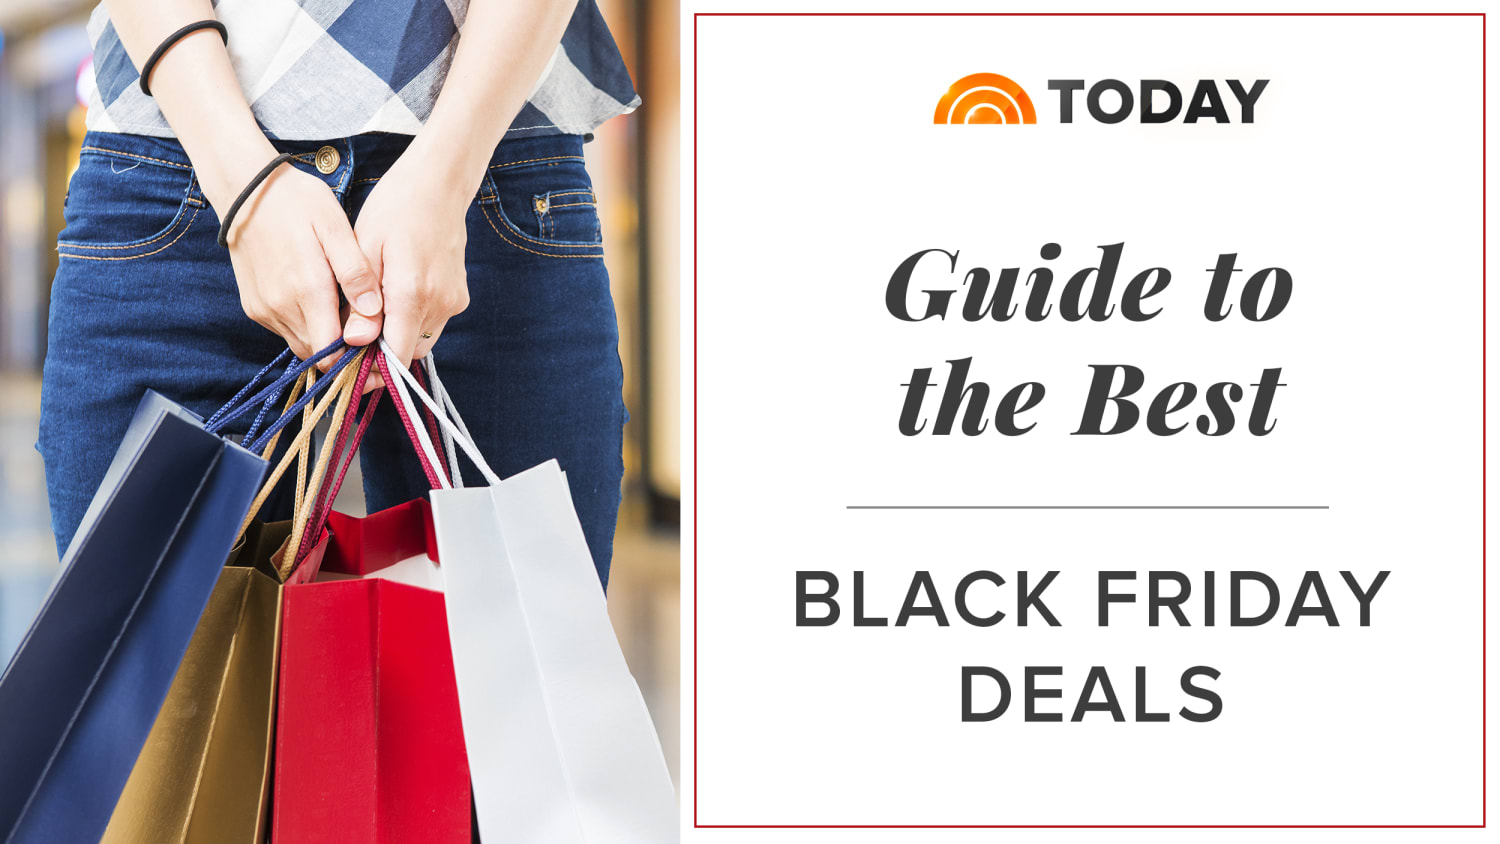 Best Black Friday Deals on Amazon, Target and more 2017 - TODAY.com - Who Has The Best Black Friday Deal